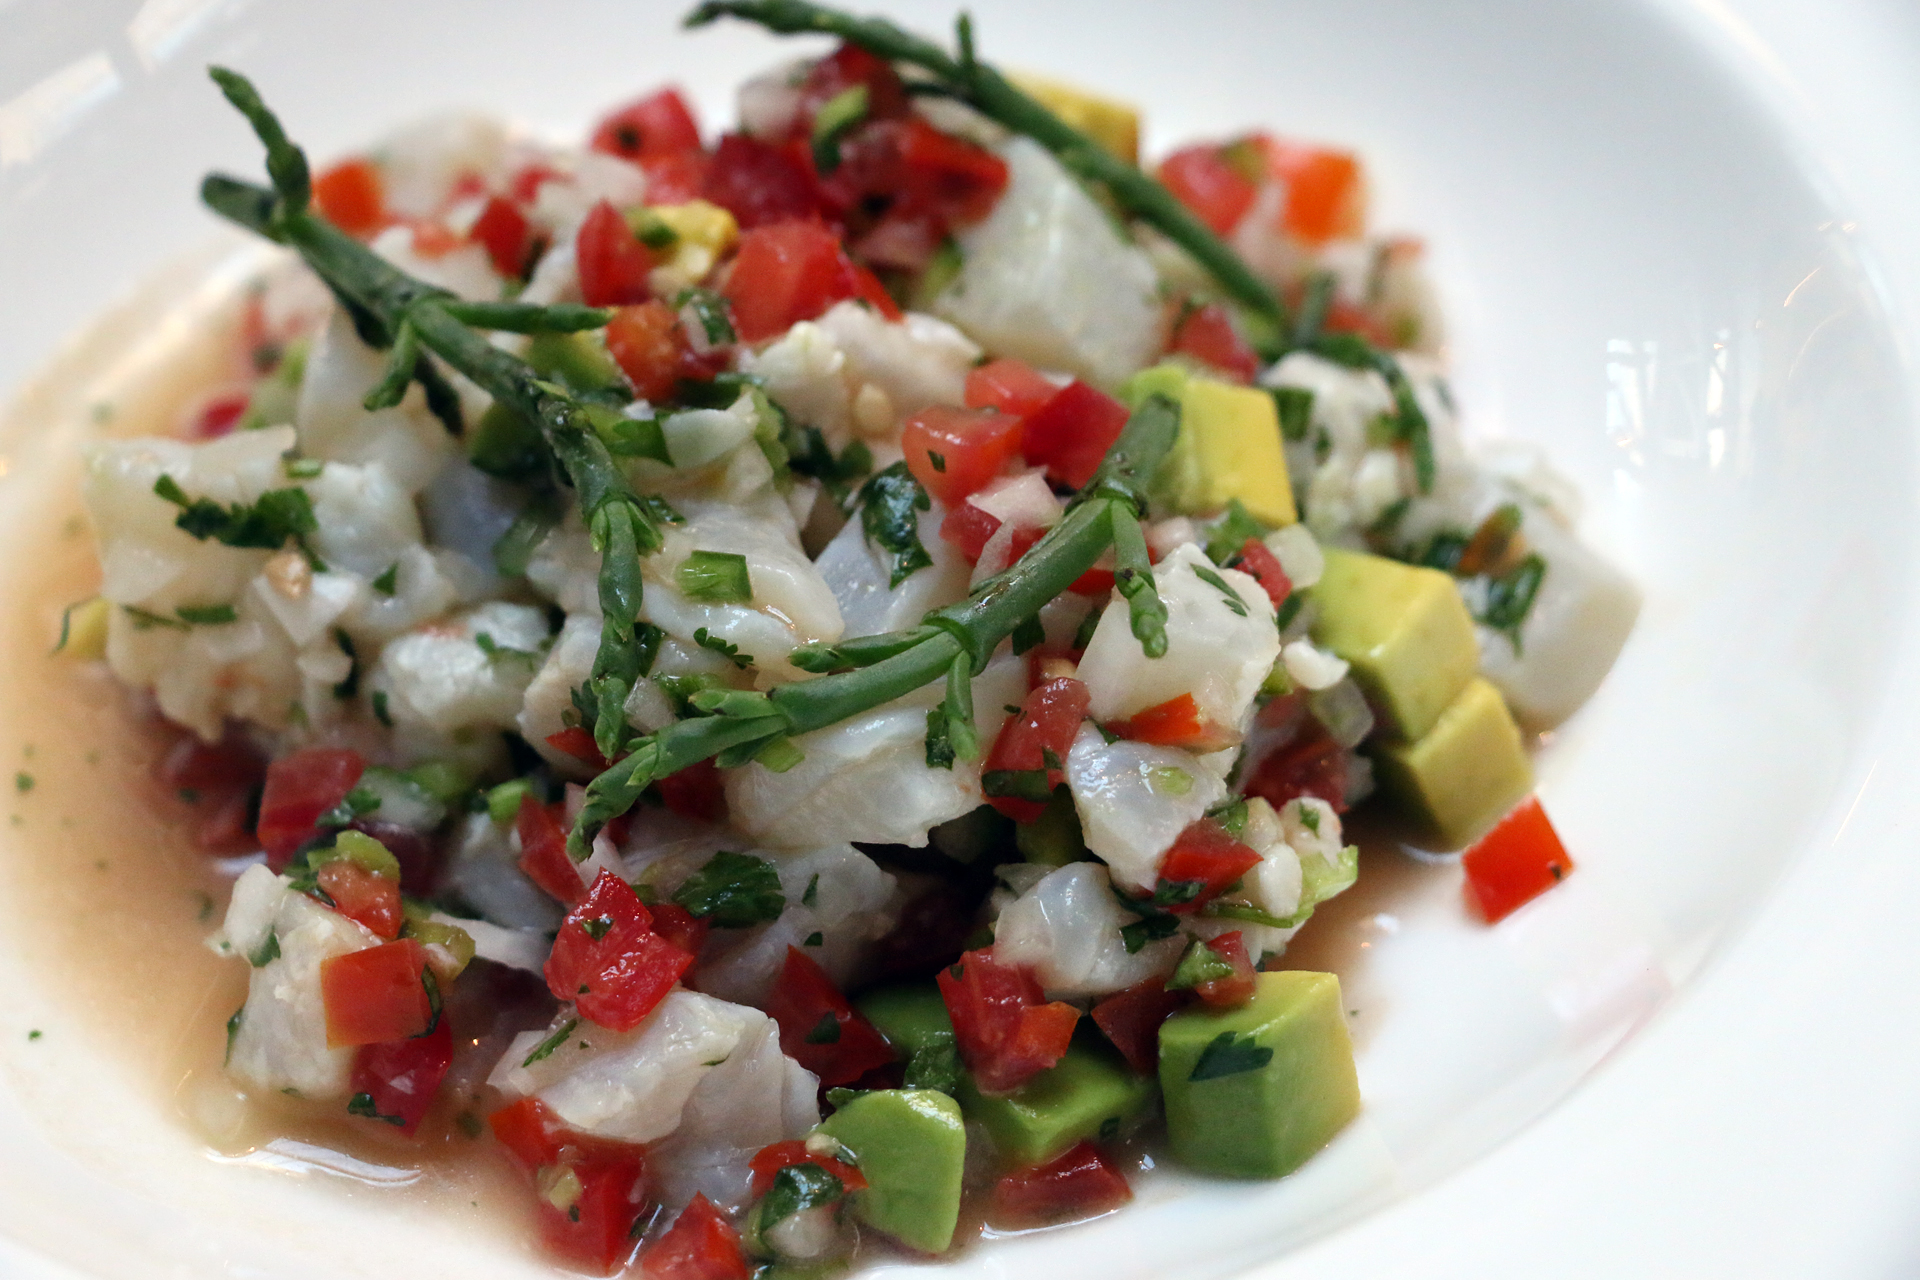 Cala's Halibut ceviche with sea beans and avocado